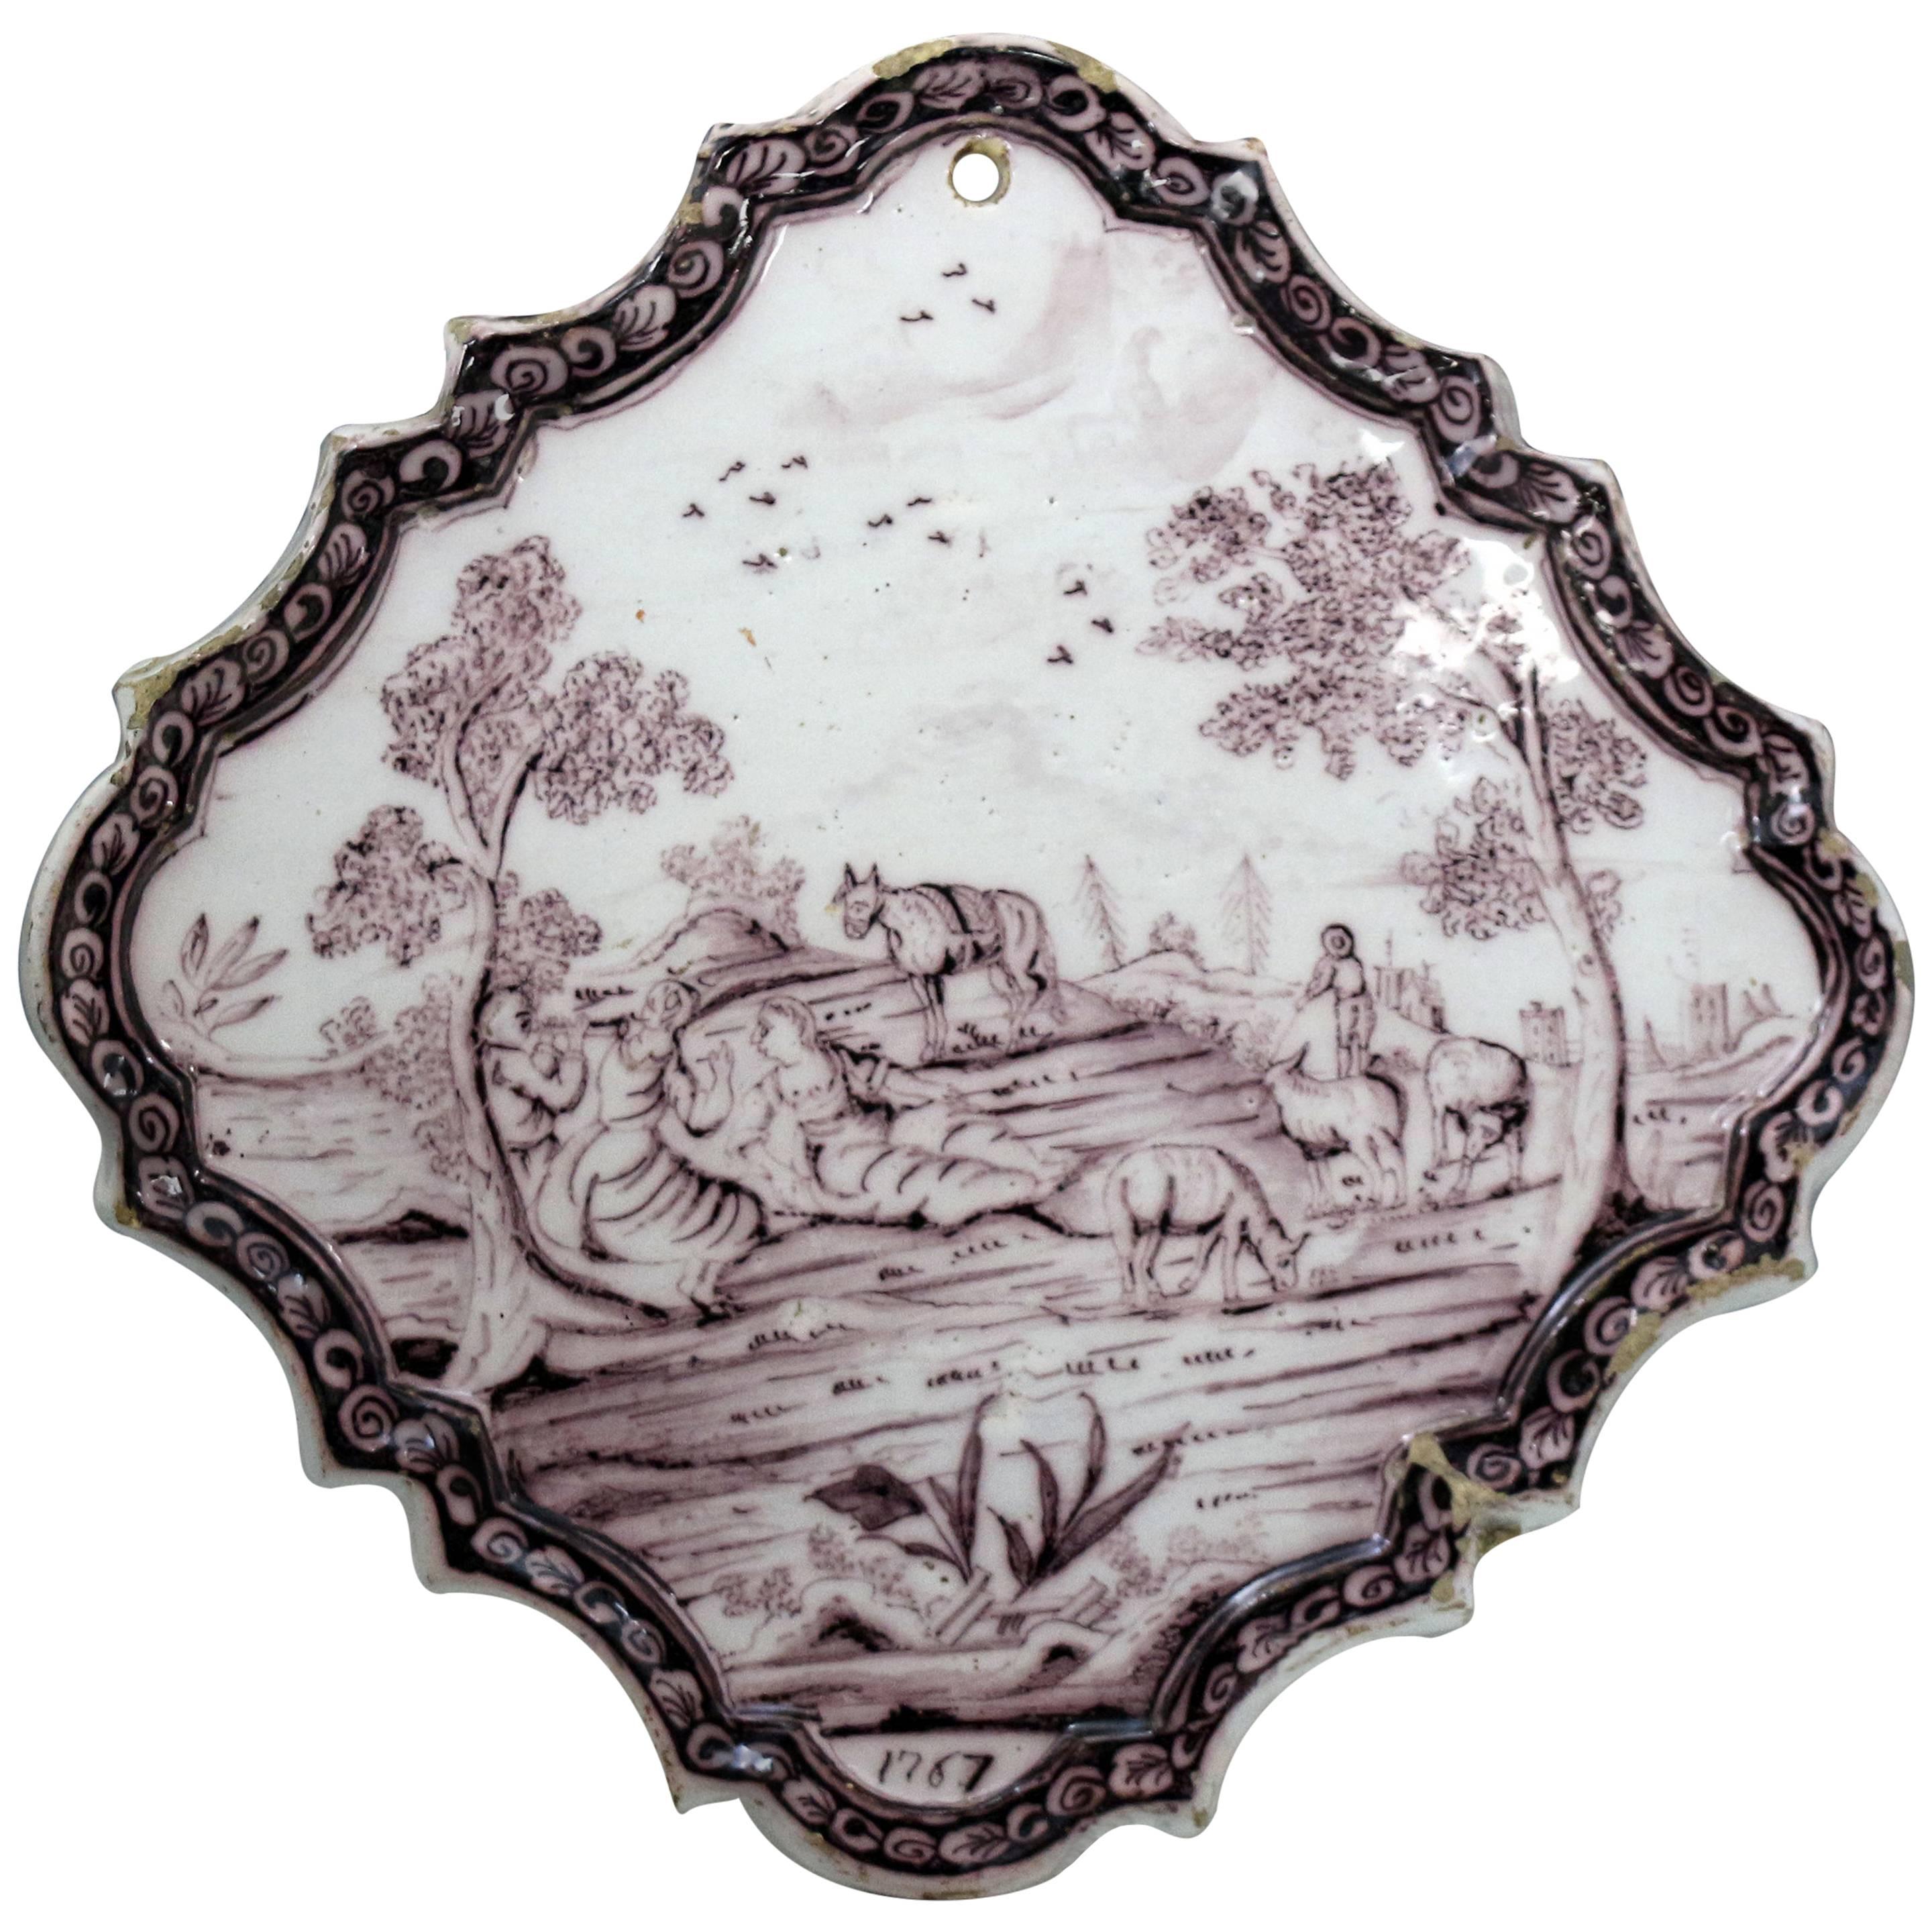 Dutch Delft Manganese Diamond Shaped Plaque with Rural Scene and Dated 1767